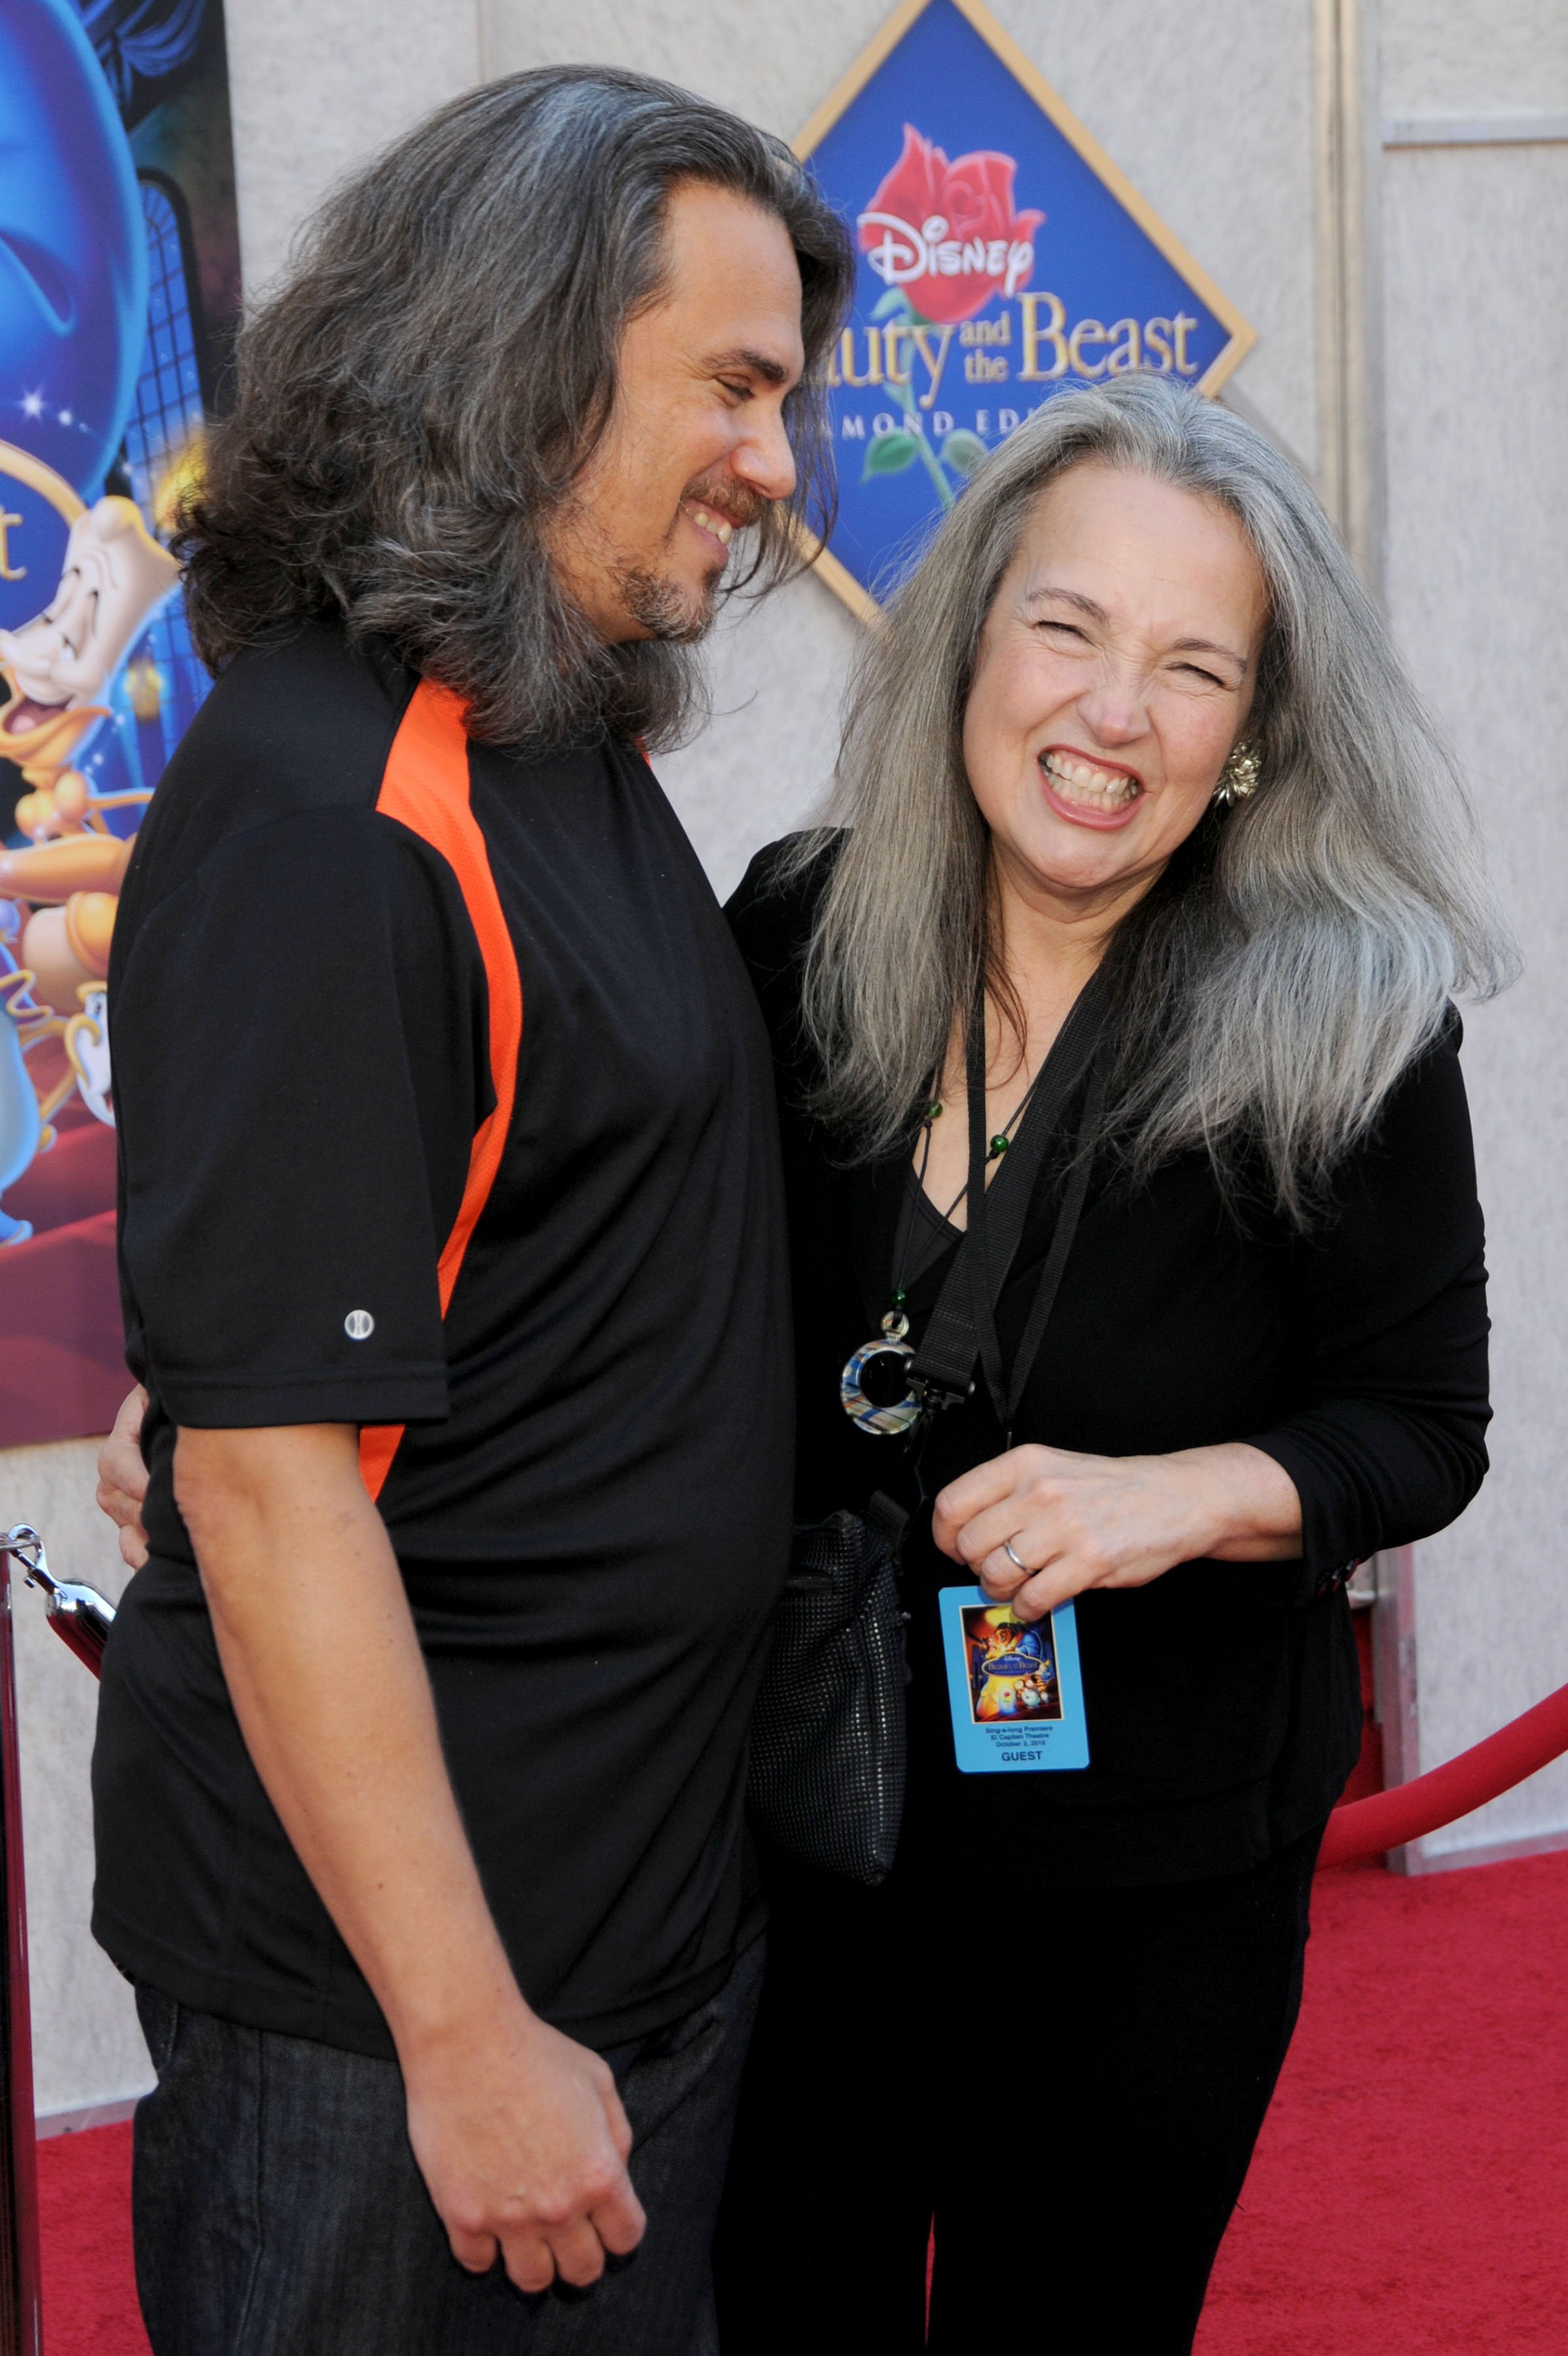 Robby Benson and Karla DeVito at El Capitan Theatre on October 2, 2010 in Hollywood, CA | Source: Getty Images